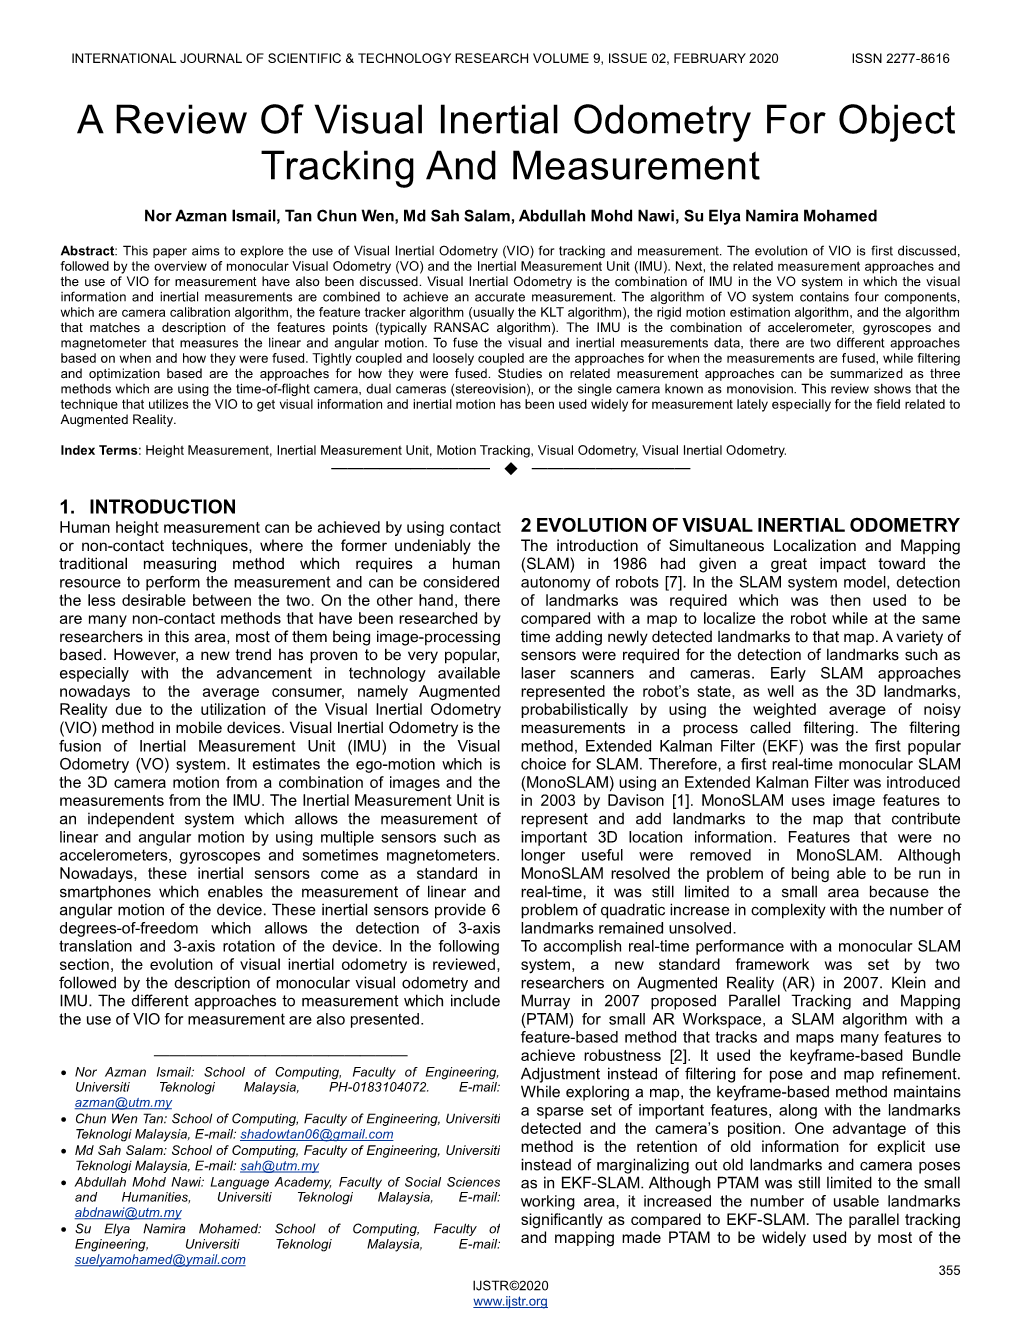 A Review of Visual Inertial Odometry for Object Tracking and Measurement